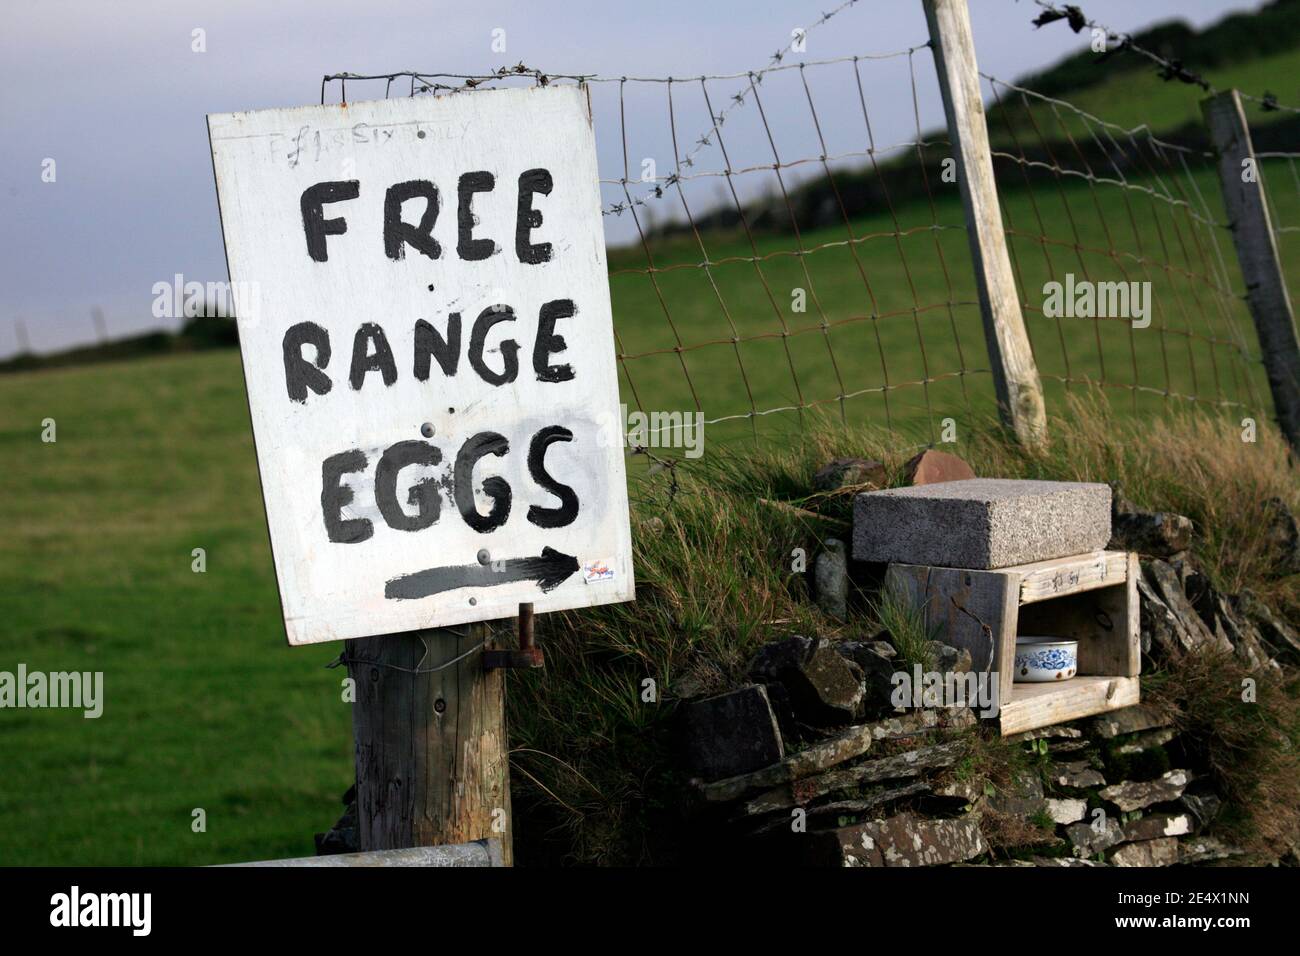 Free Range Eggs for sale at side of rural road in Devon. England. Free range eggs cannot be sold in UK from 21st March 2022 due to bird flu. Stock Photo